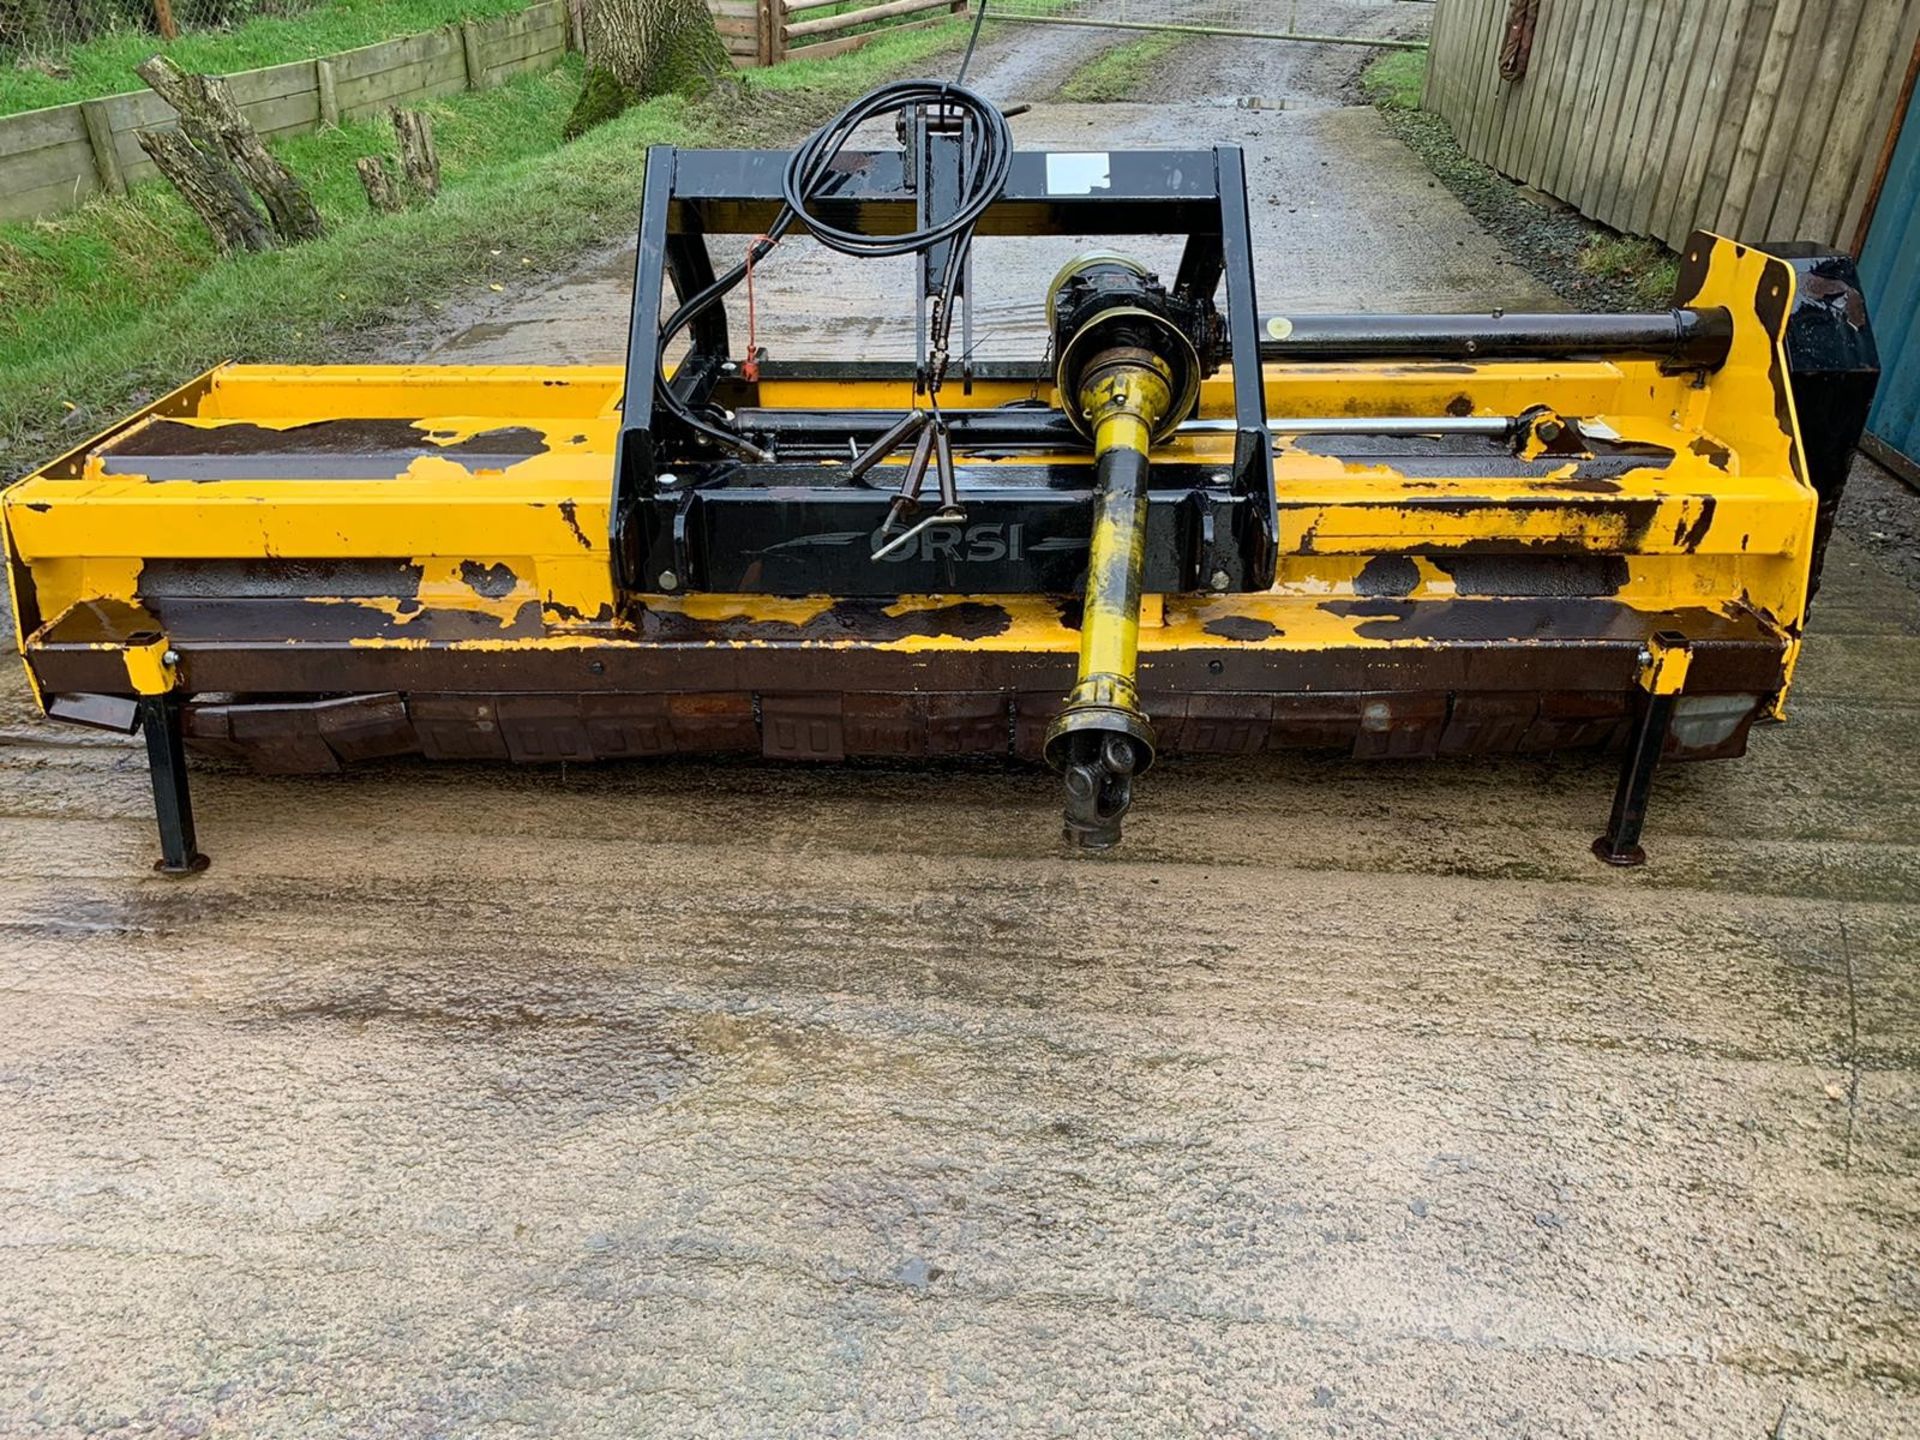 ORSI 2.8MTR FLAIL MOWER 2007, HYDRAULIC SIDE SHIFT FRONT/REAR - Image 4 of 4